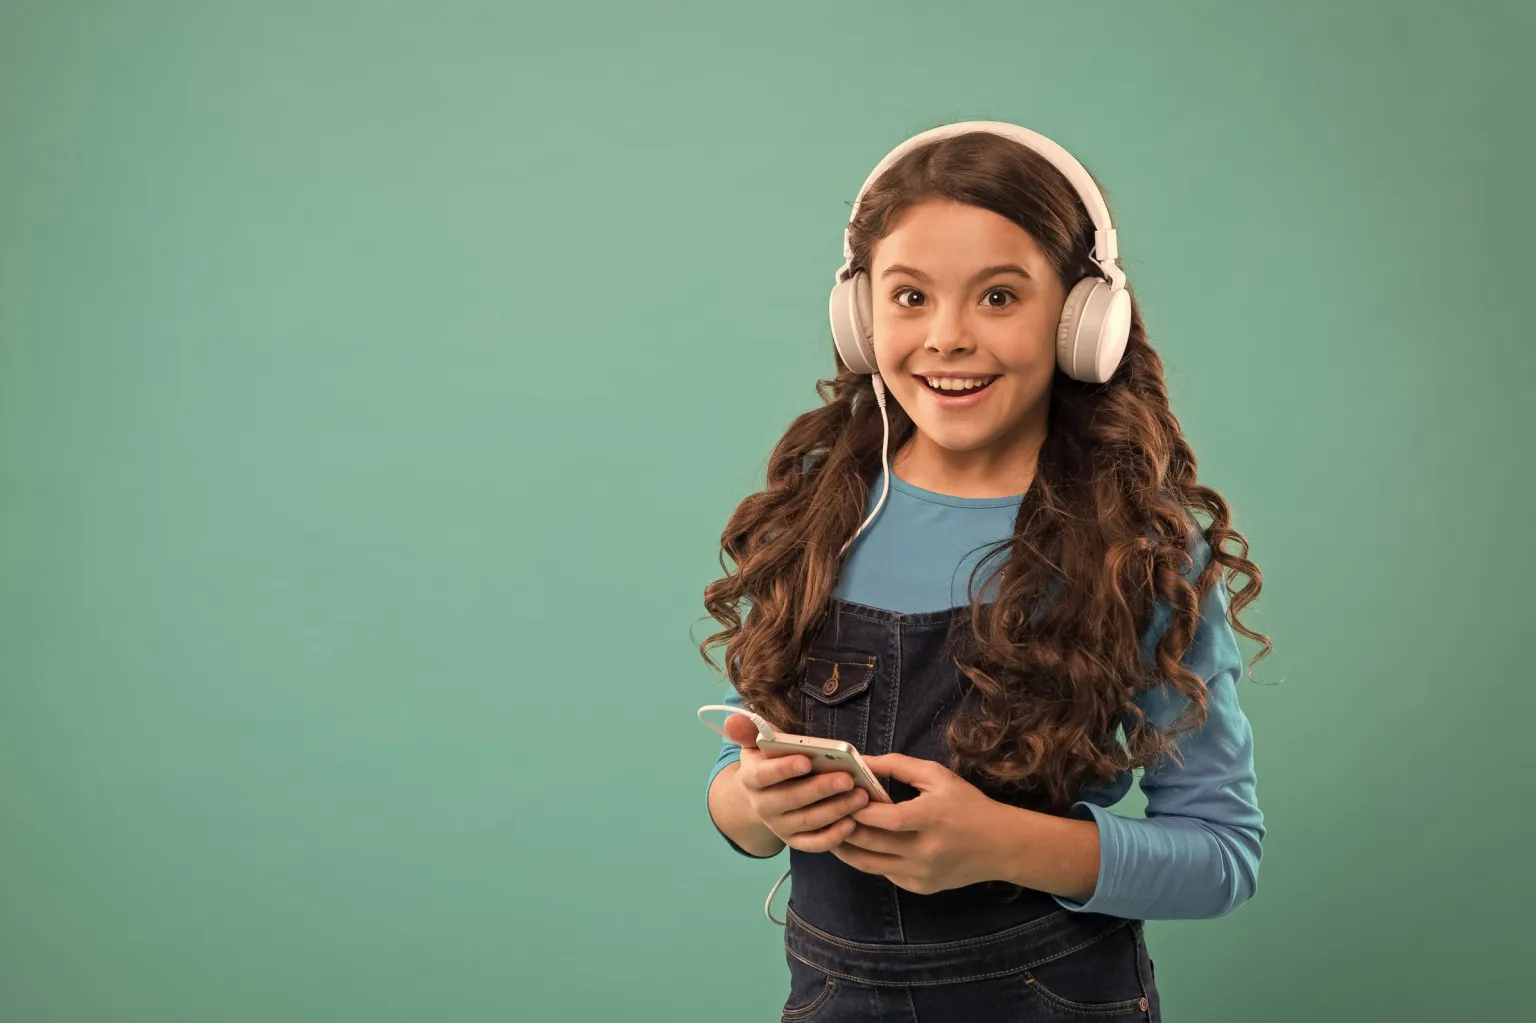 Girl with headphones holding the phone